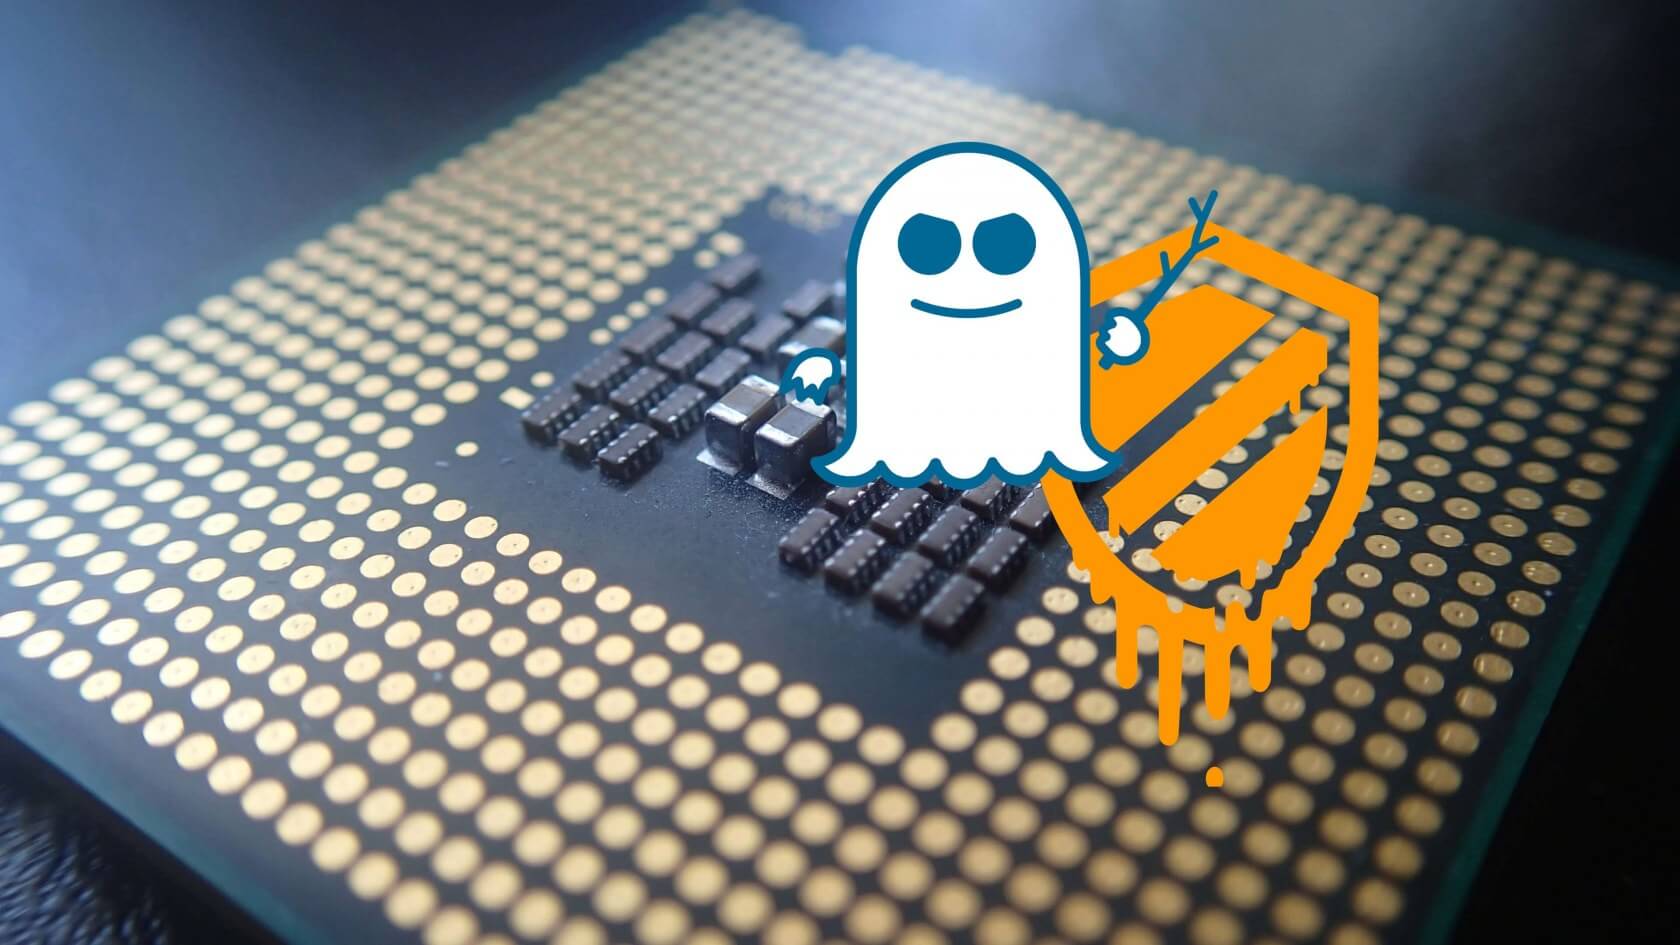 Google researchers say software patches will never fully protect against Spectre-like flaws